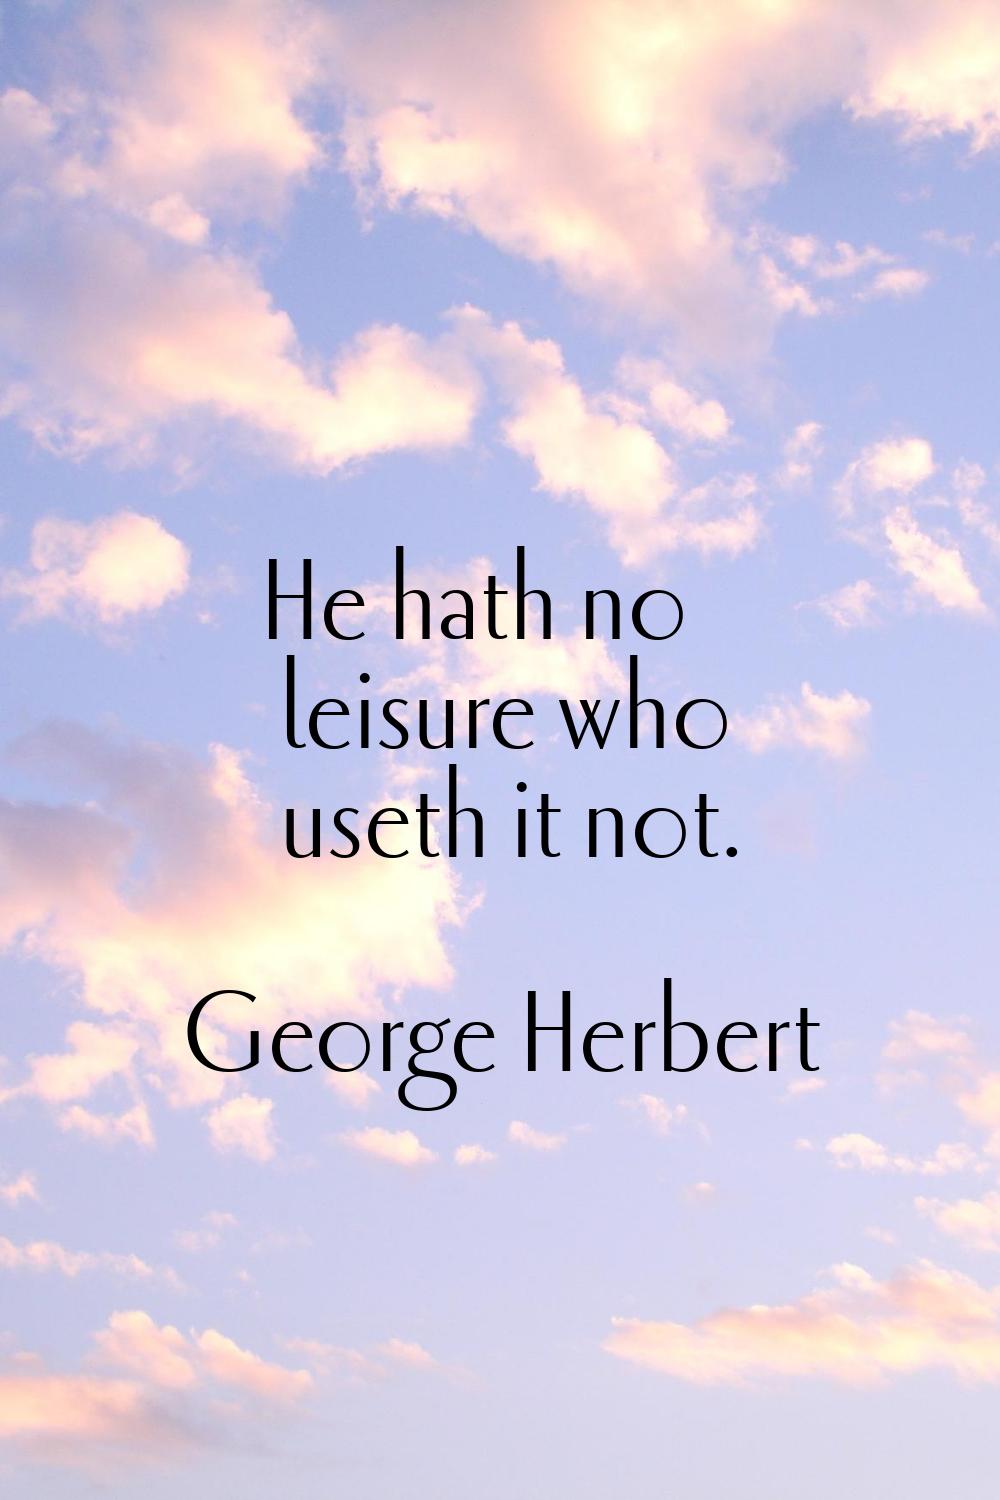 He hath no leisure who useth it not.